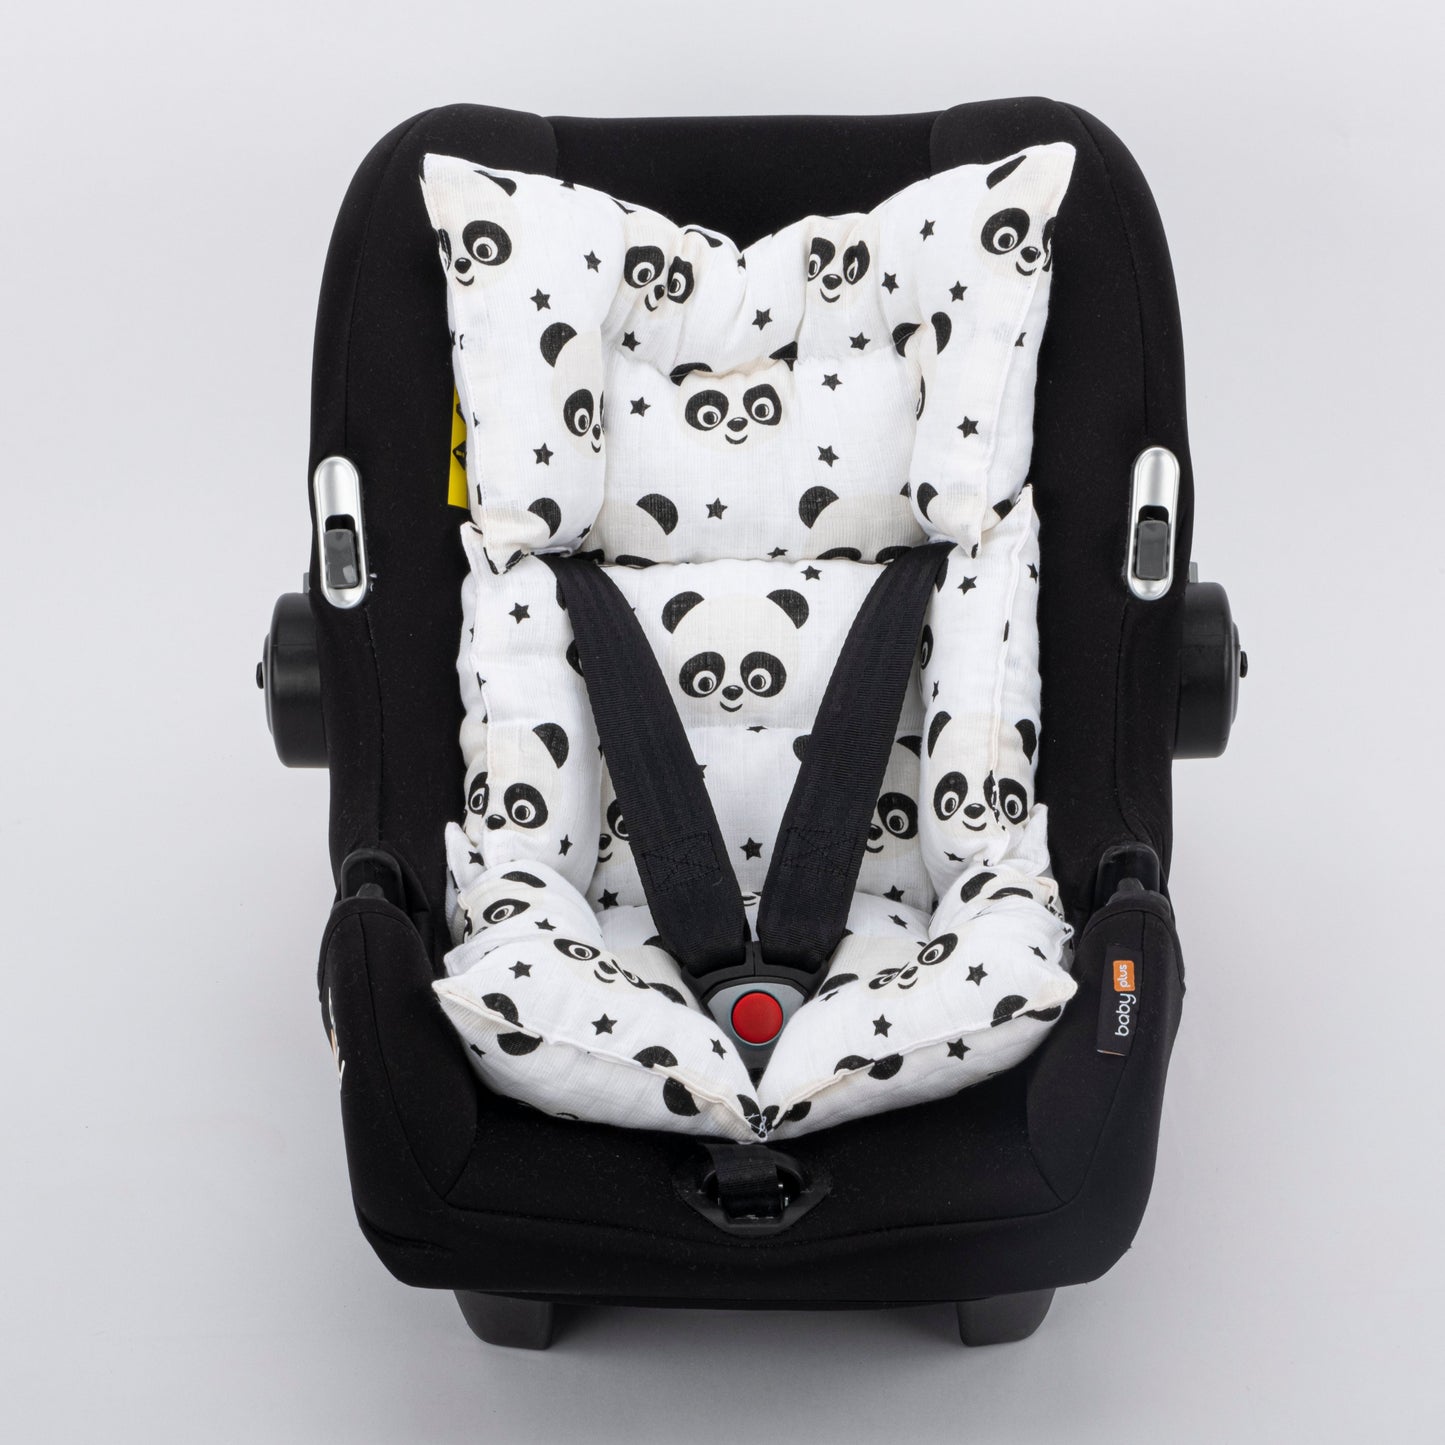 Stroller Cover Set - Double Side - Cream Knitted - Panda